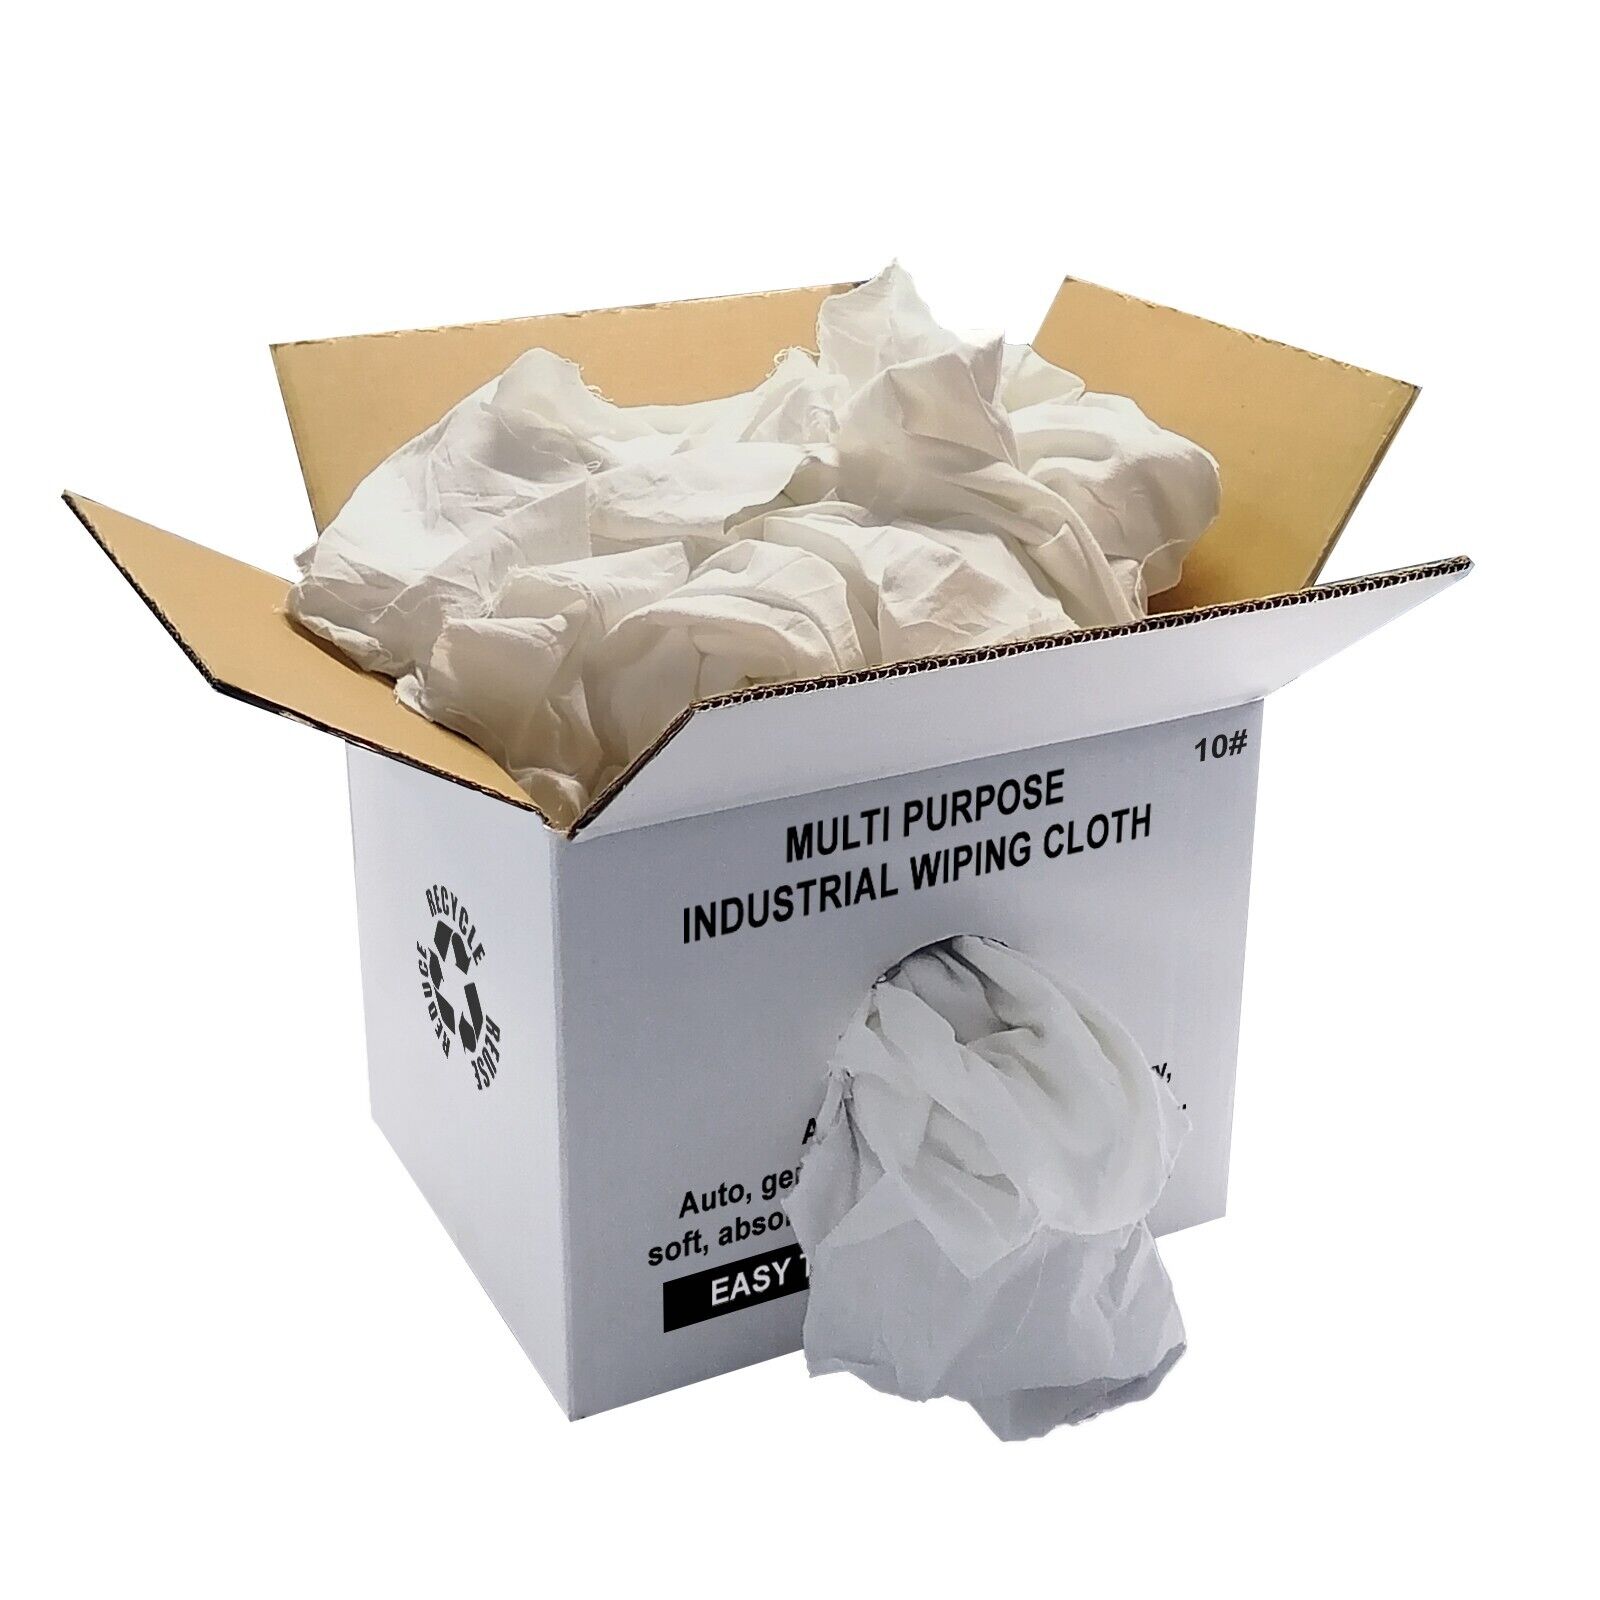 White Recycled Sheeting Rags Wiping Rags - 10 lbs. Box - Multi Purpose Cleaning